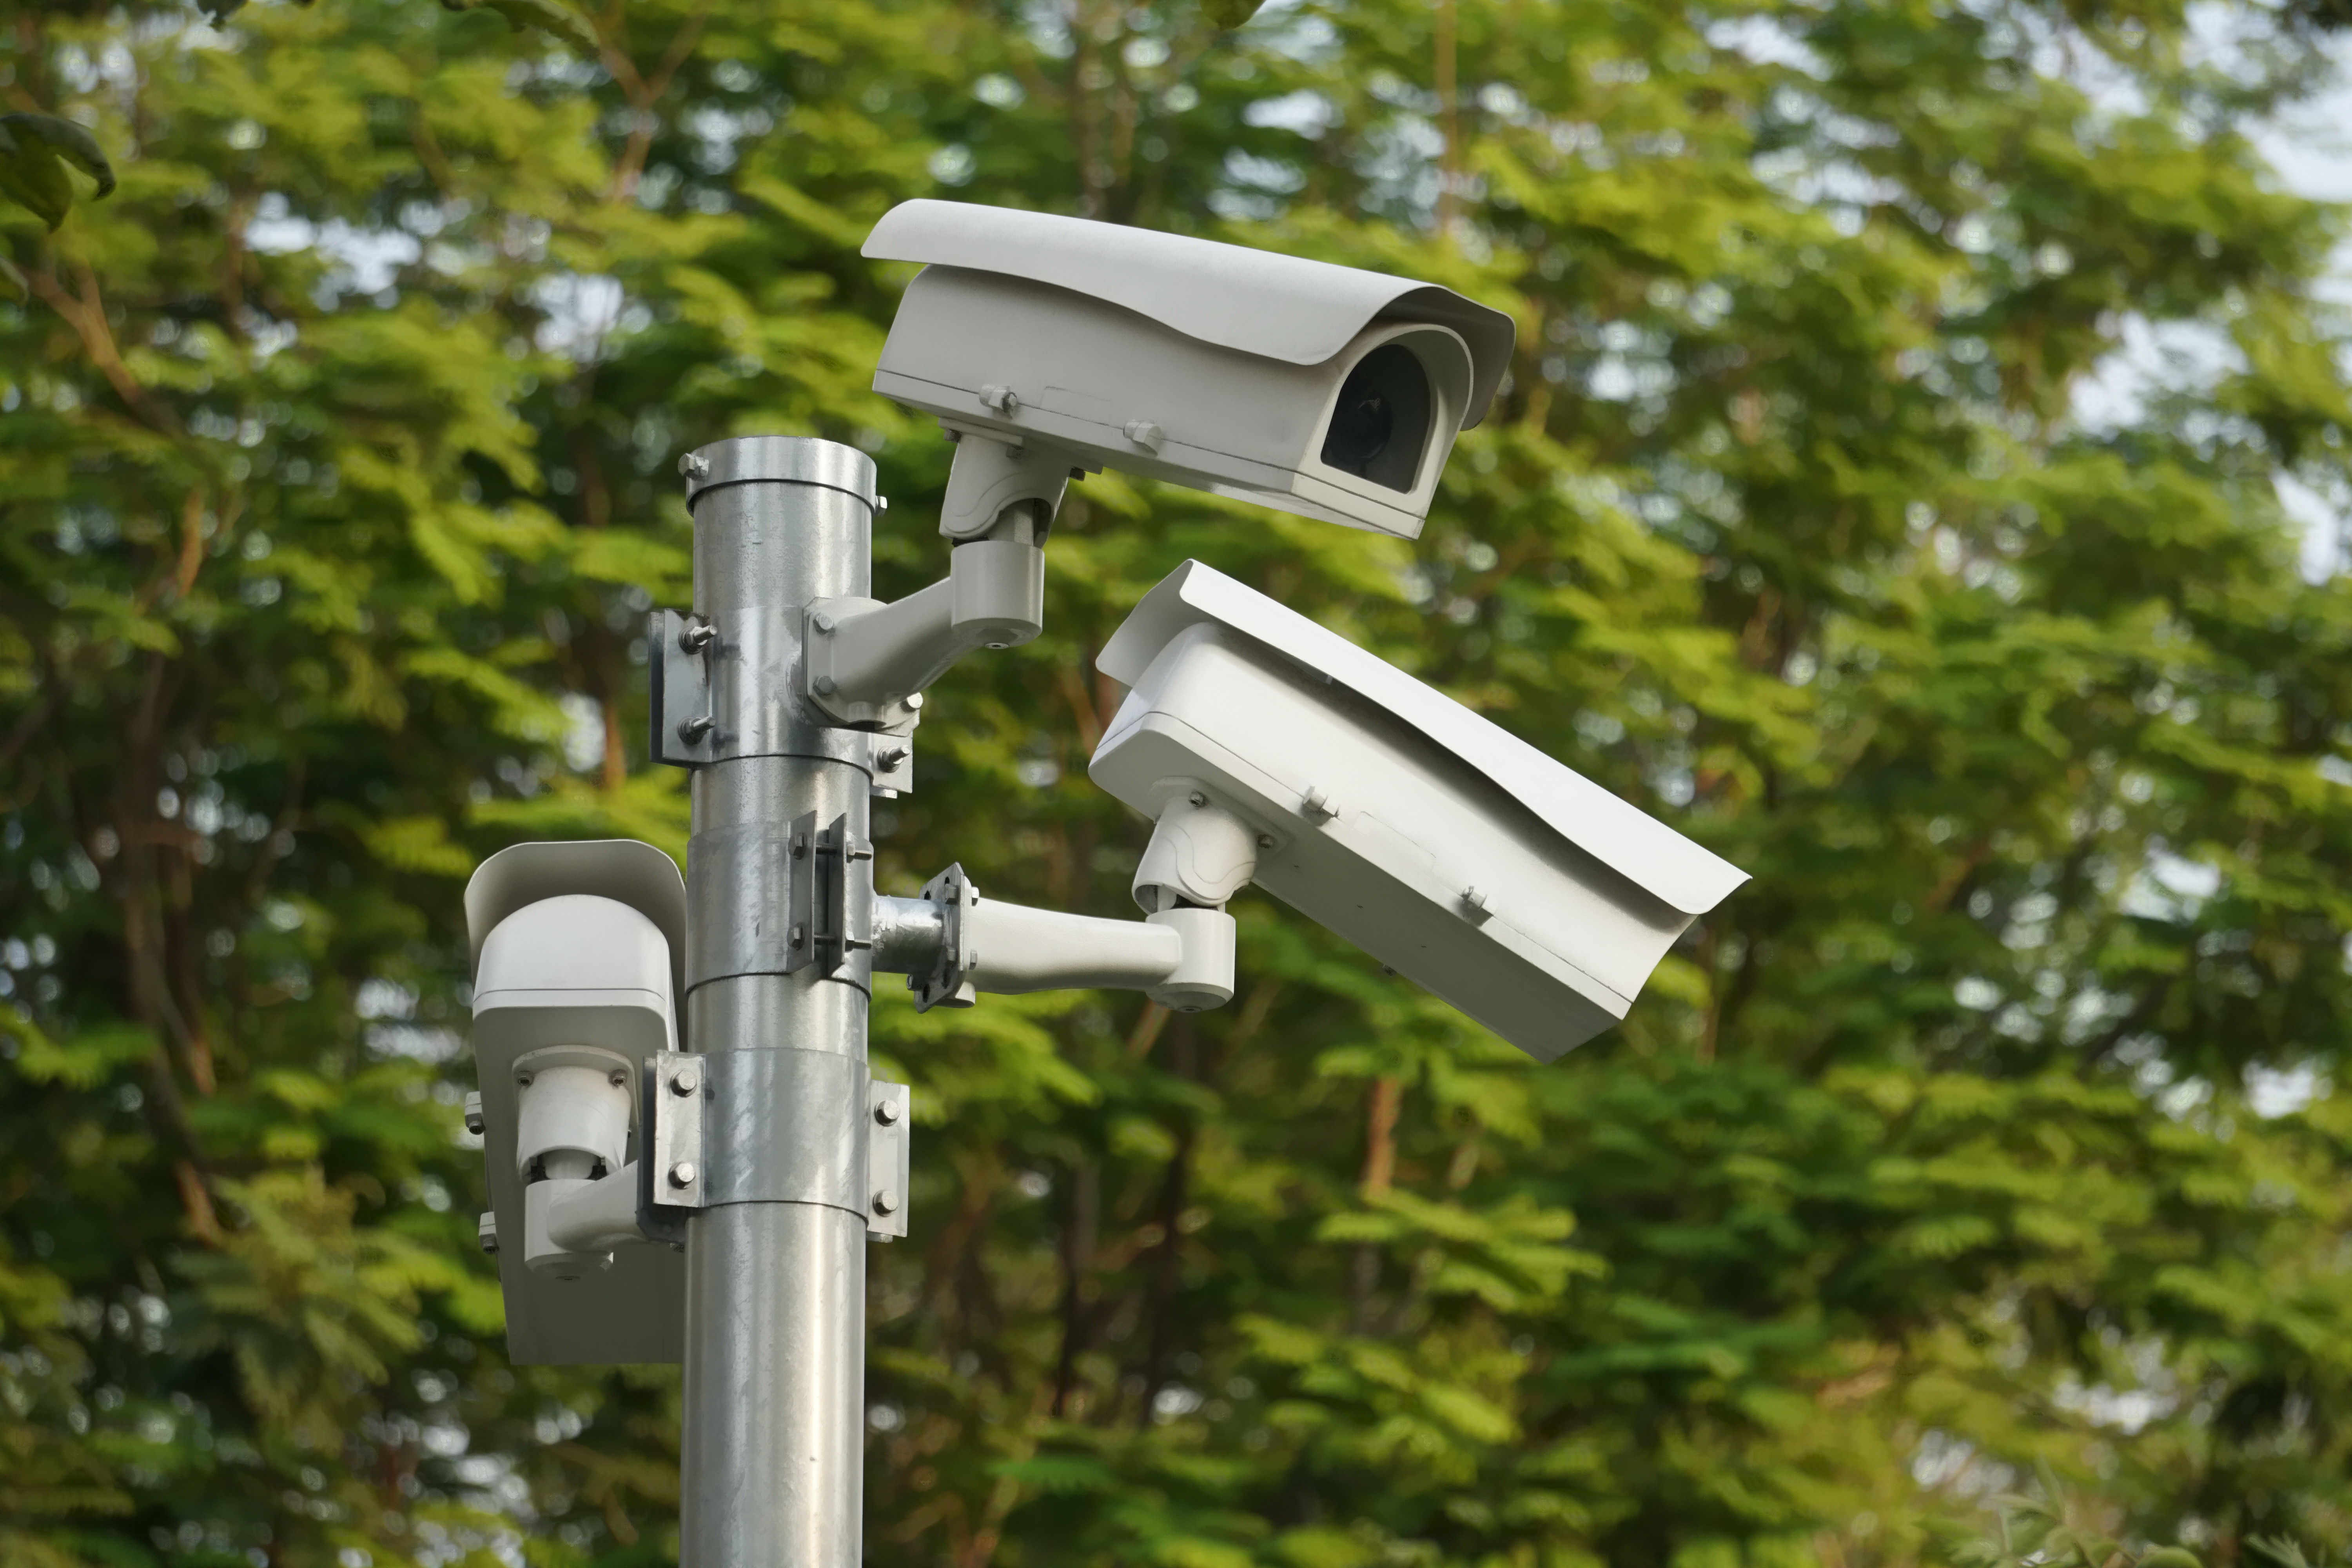 CCTV cameras installed on a pole | Source: Shutterstock